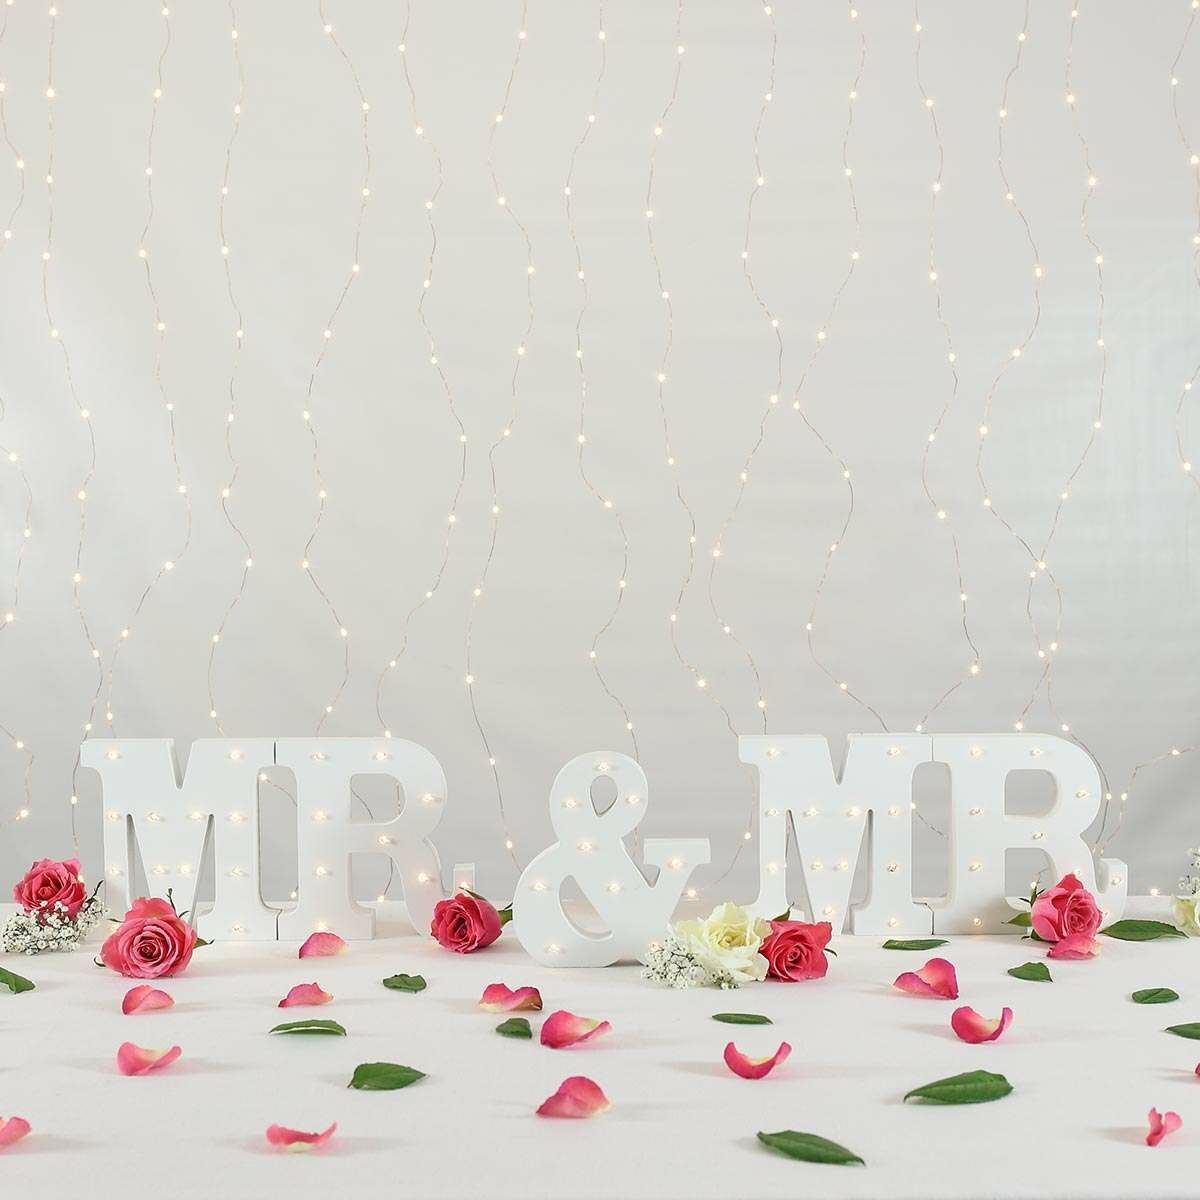 Mr & Mr Battery Light Up Circus Letters, Warm White LEDs image 2